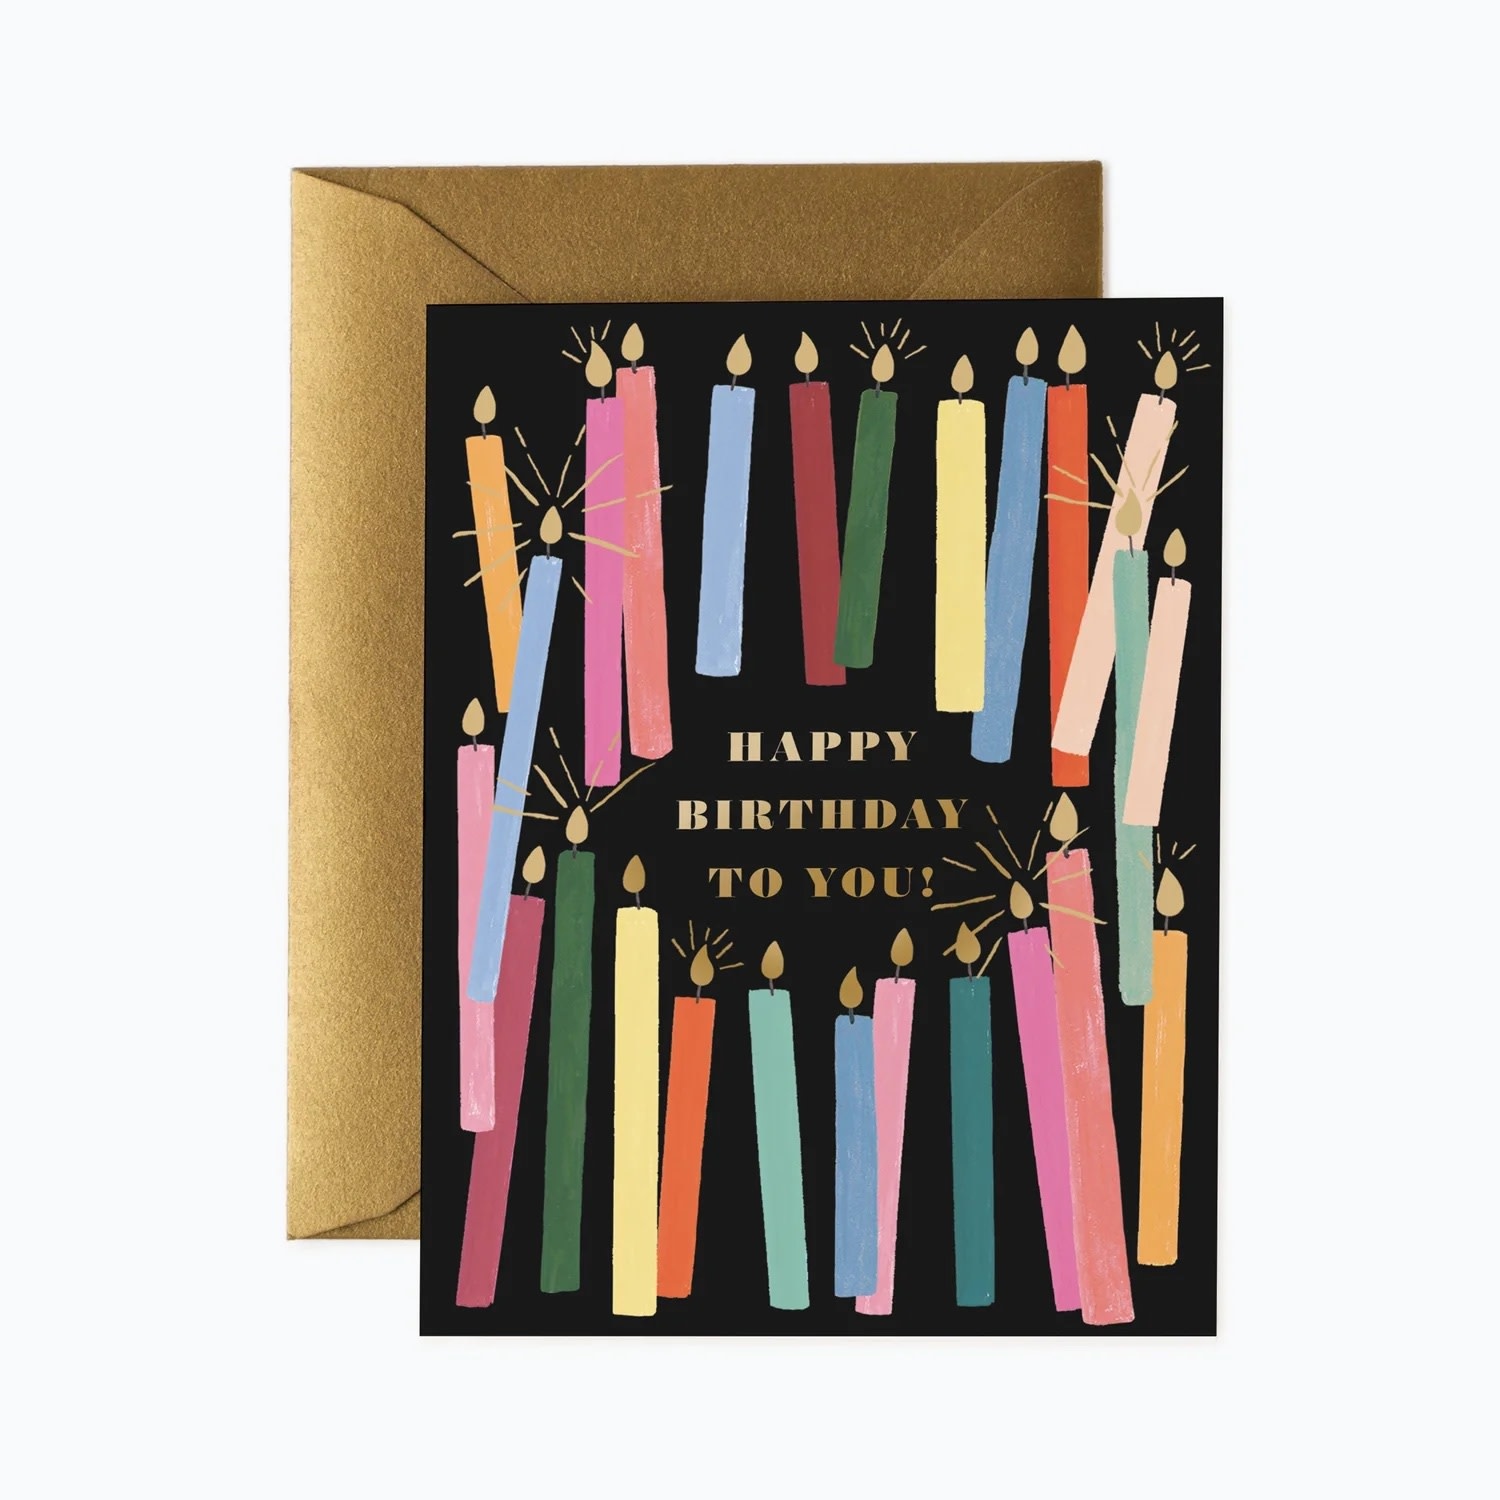 Rifle Paper Co - RP Rifle Paper Co - Happy Birthday To You Candles Card